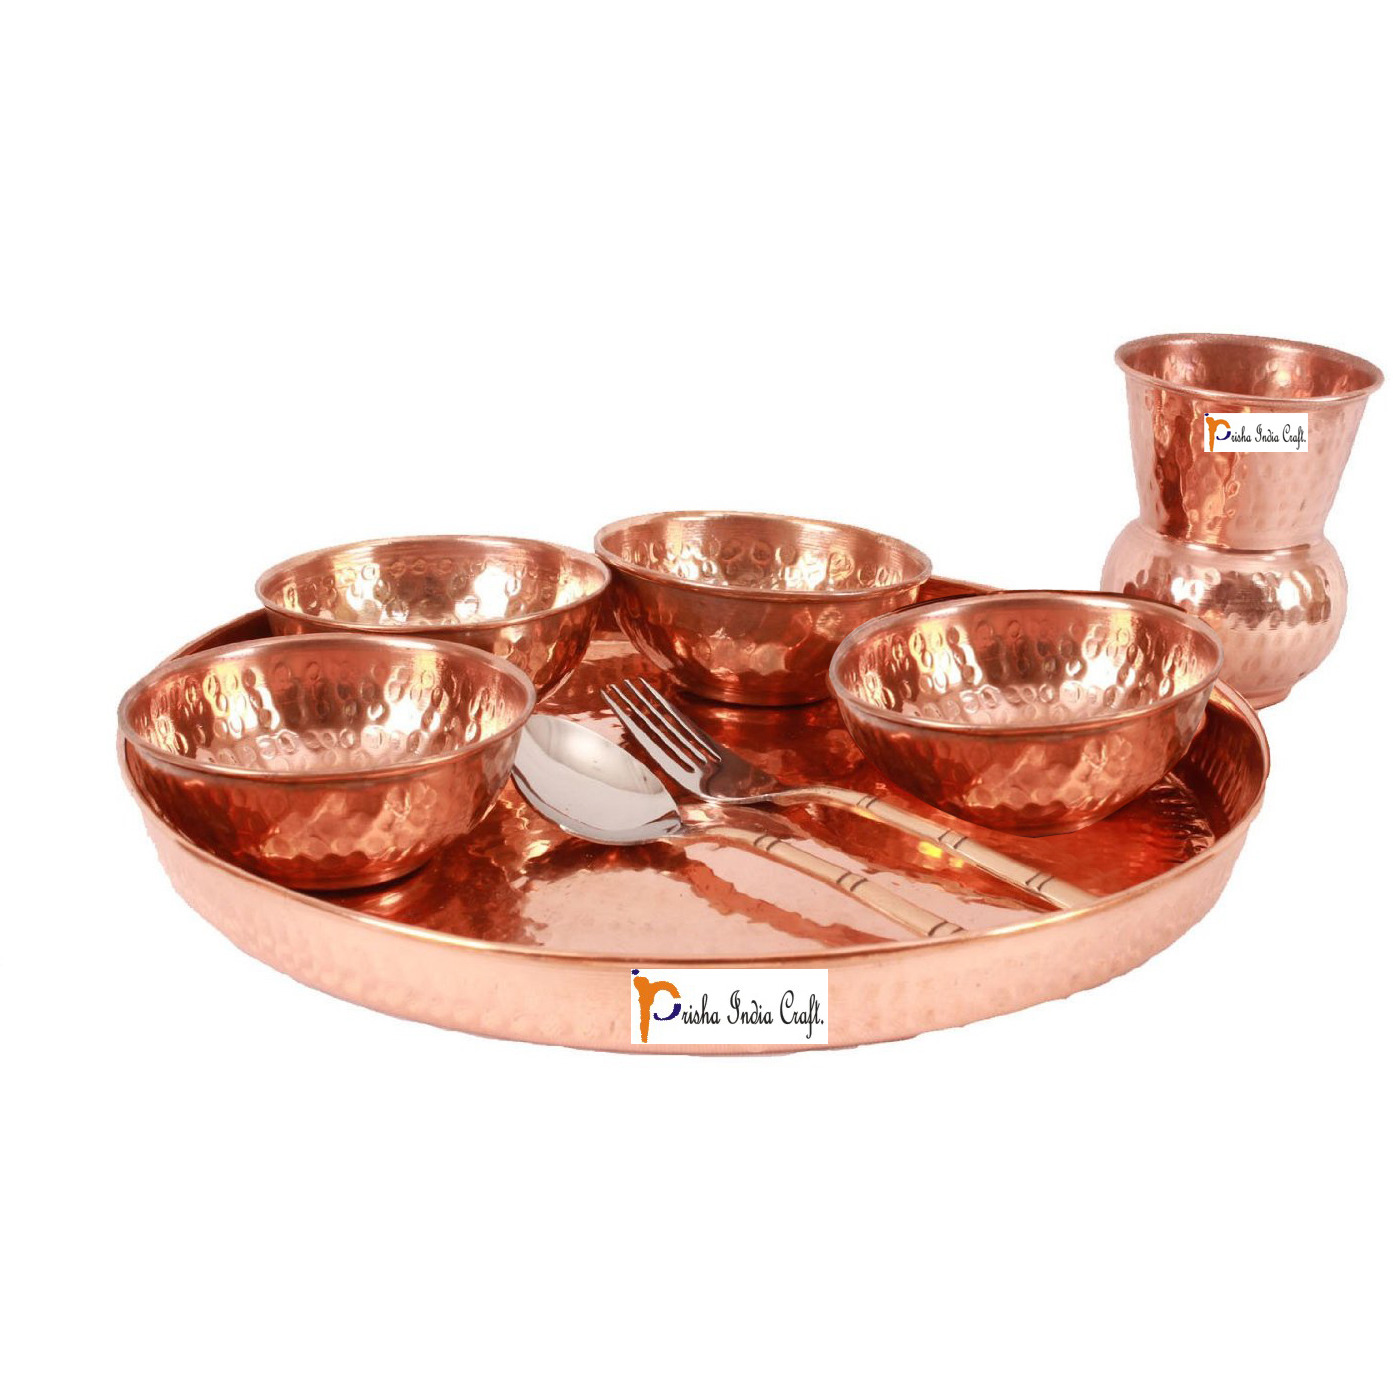 Prisha India Craft B. Dinnerware Traditional 100% Pure Copper Dinner Set of Thali Plate, Bowls, Glass and Spoon, Dia 12  With 1 Stainless Steel Copper Pitcher Jug - Christmas Gift